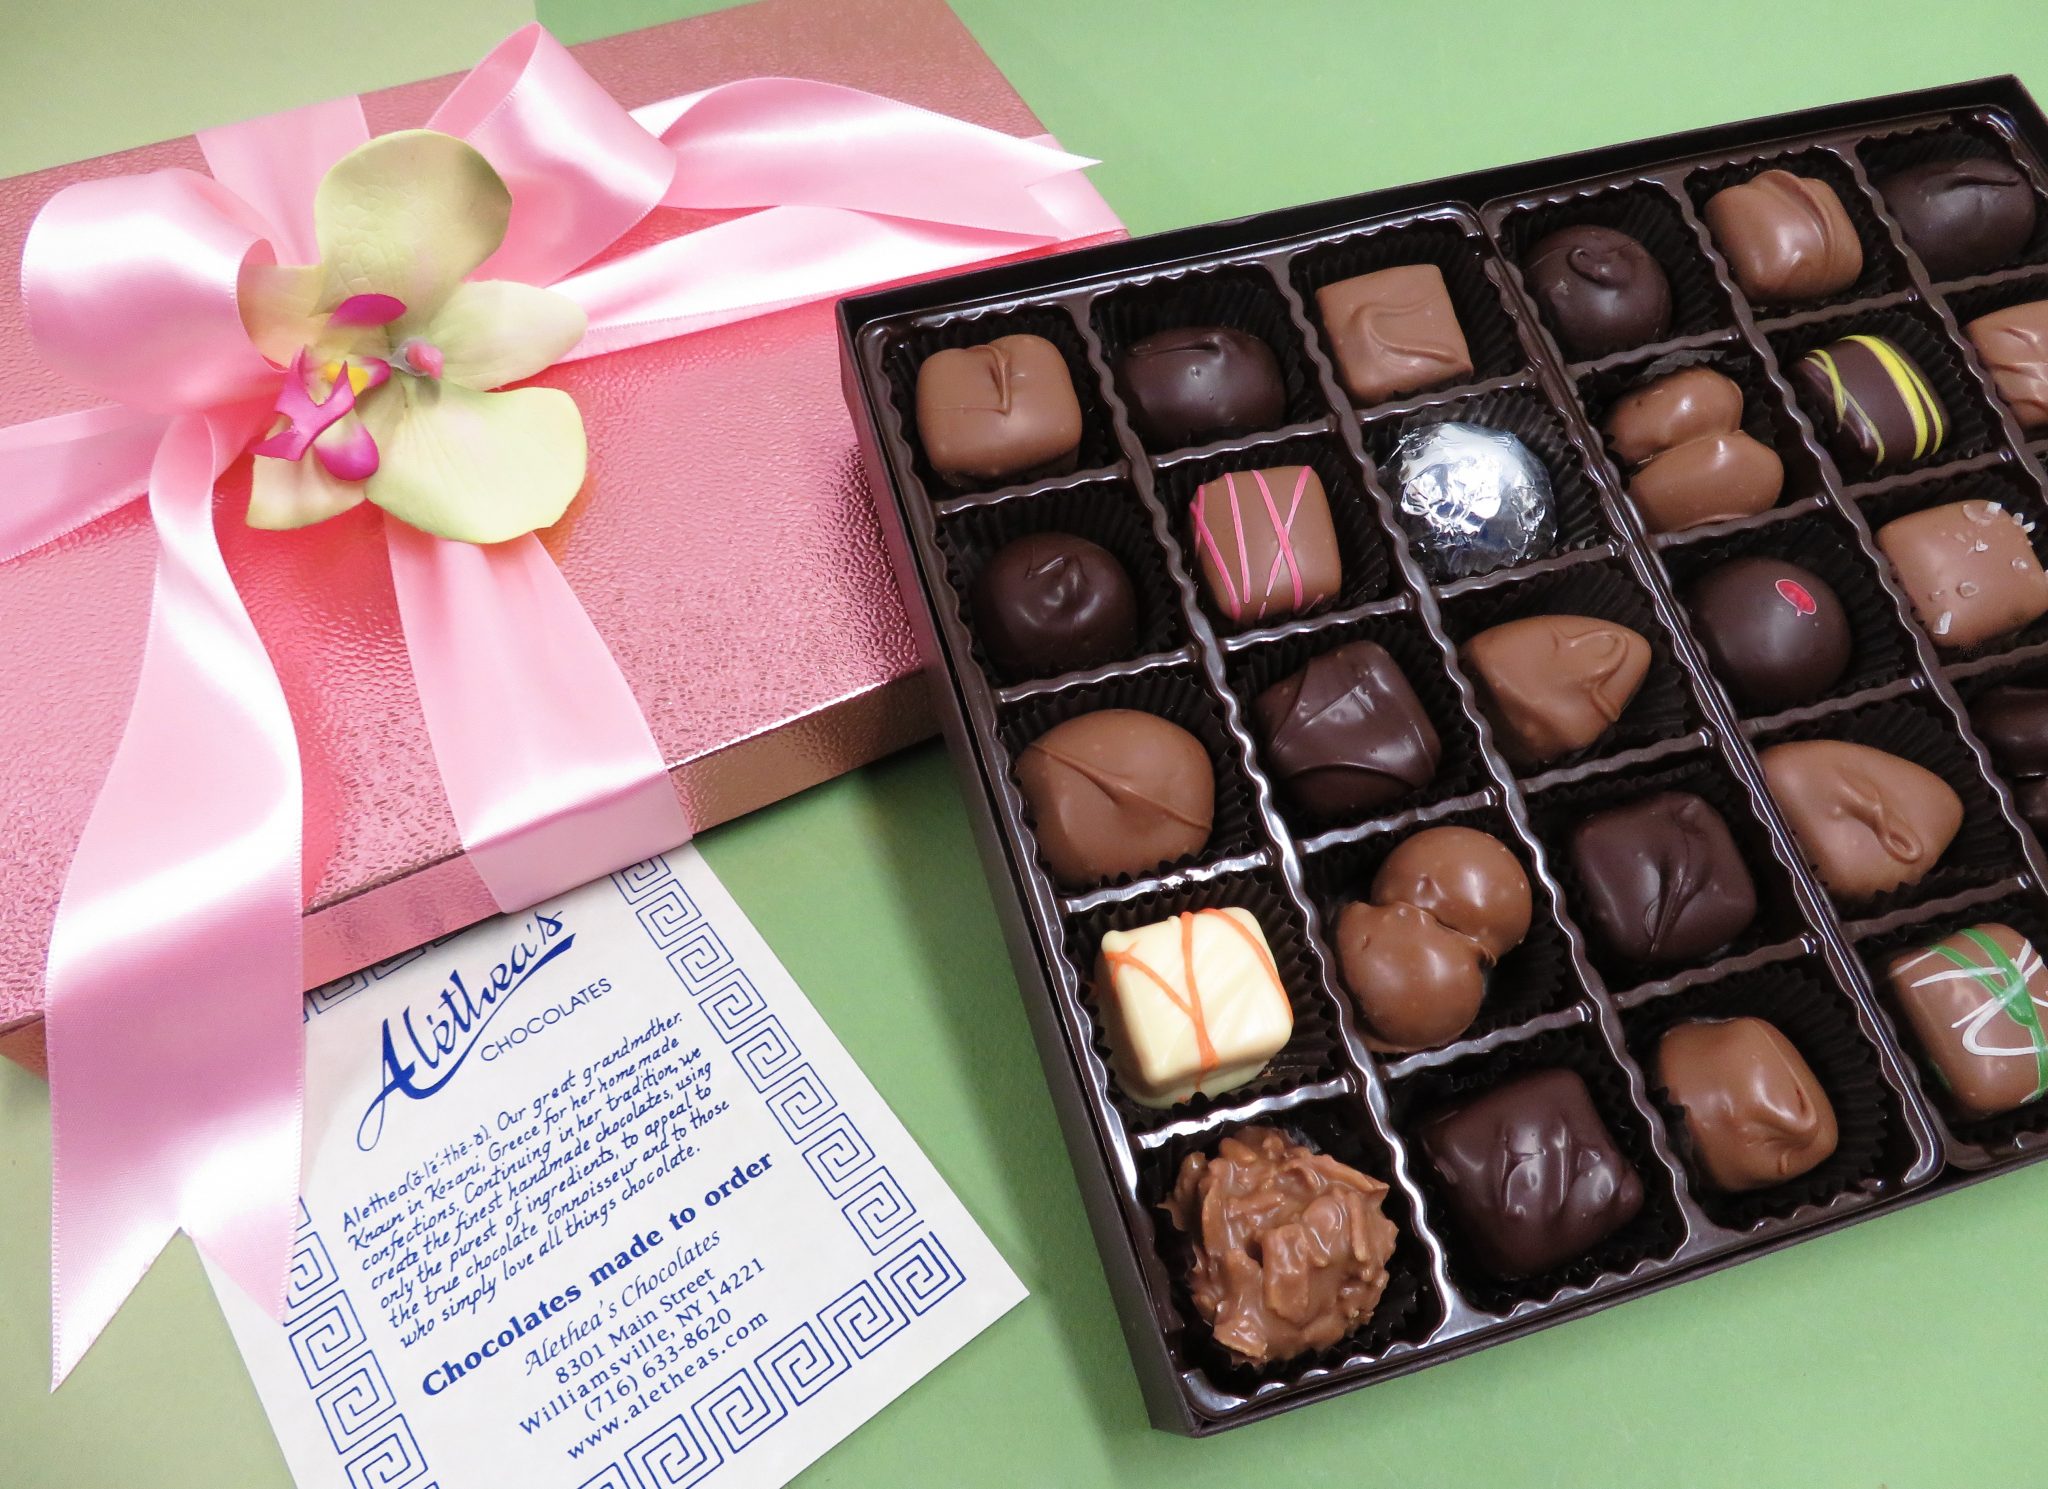 Lovely spring or Easter gift box of artisan chocolates